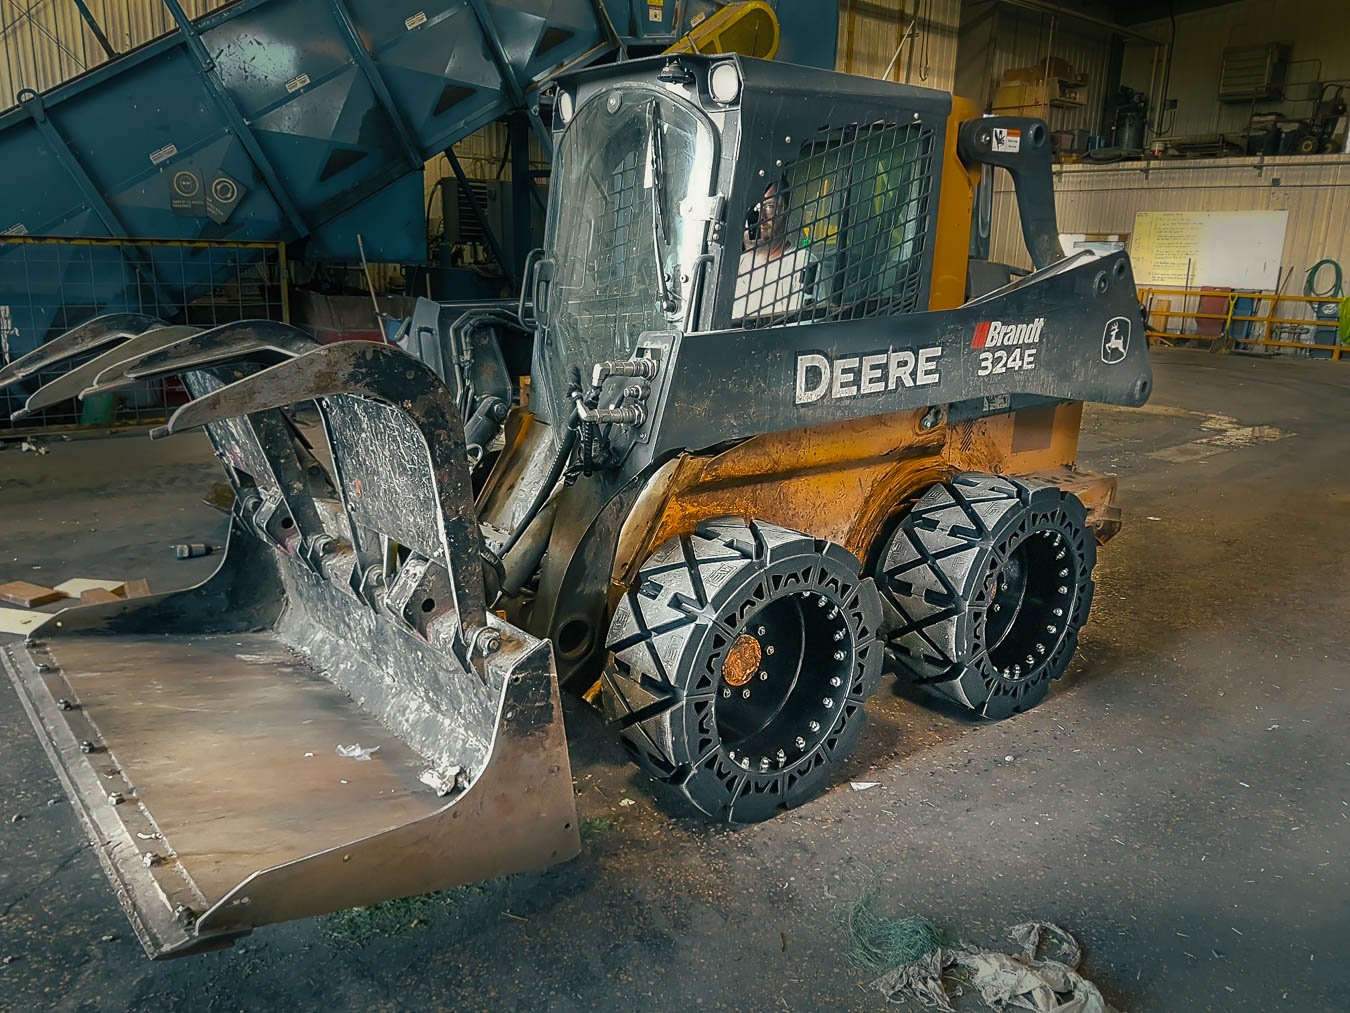 This image shows a DEERE 324E with our 10x16.5 Solid Skid Steer Tires the EWRS-HS